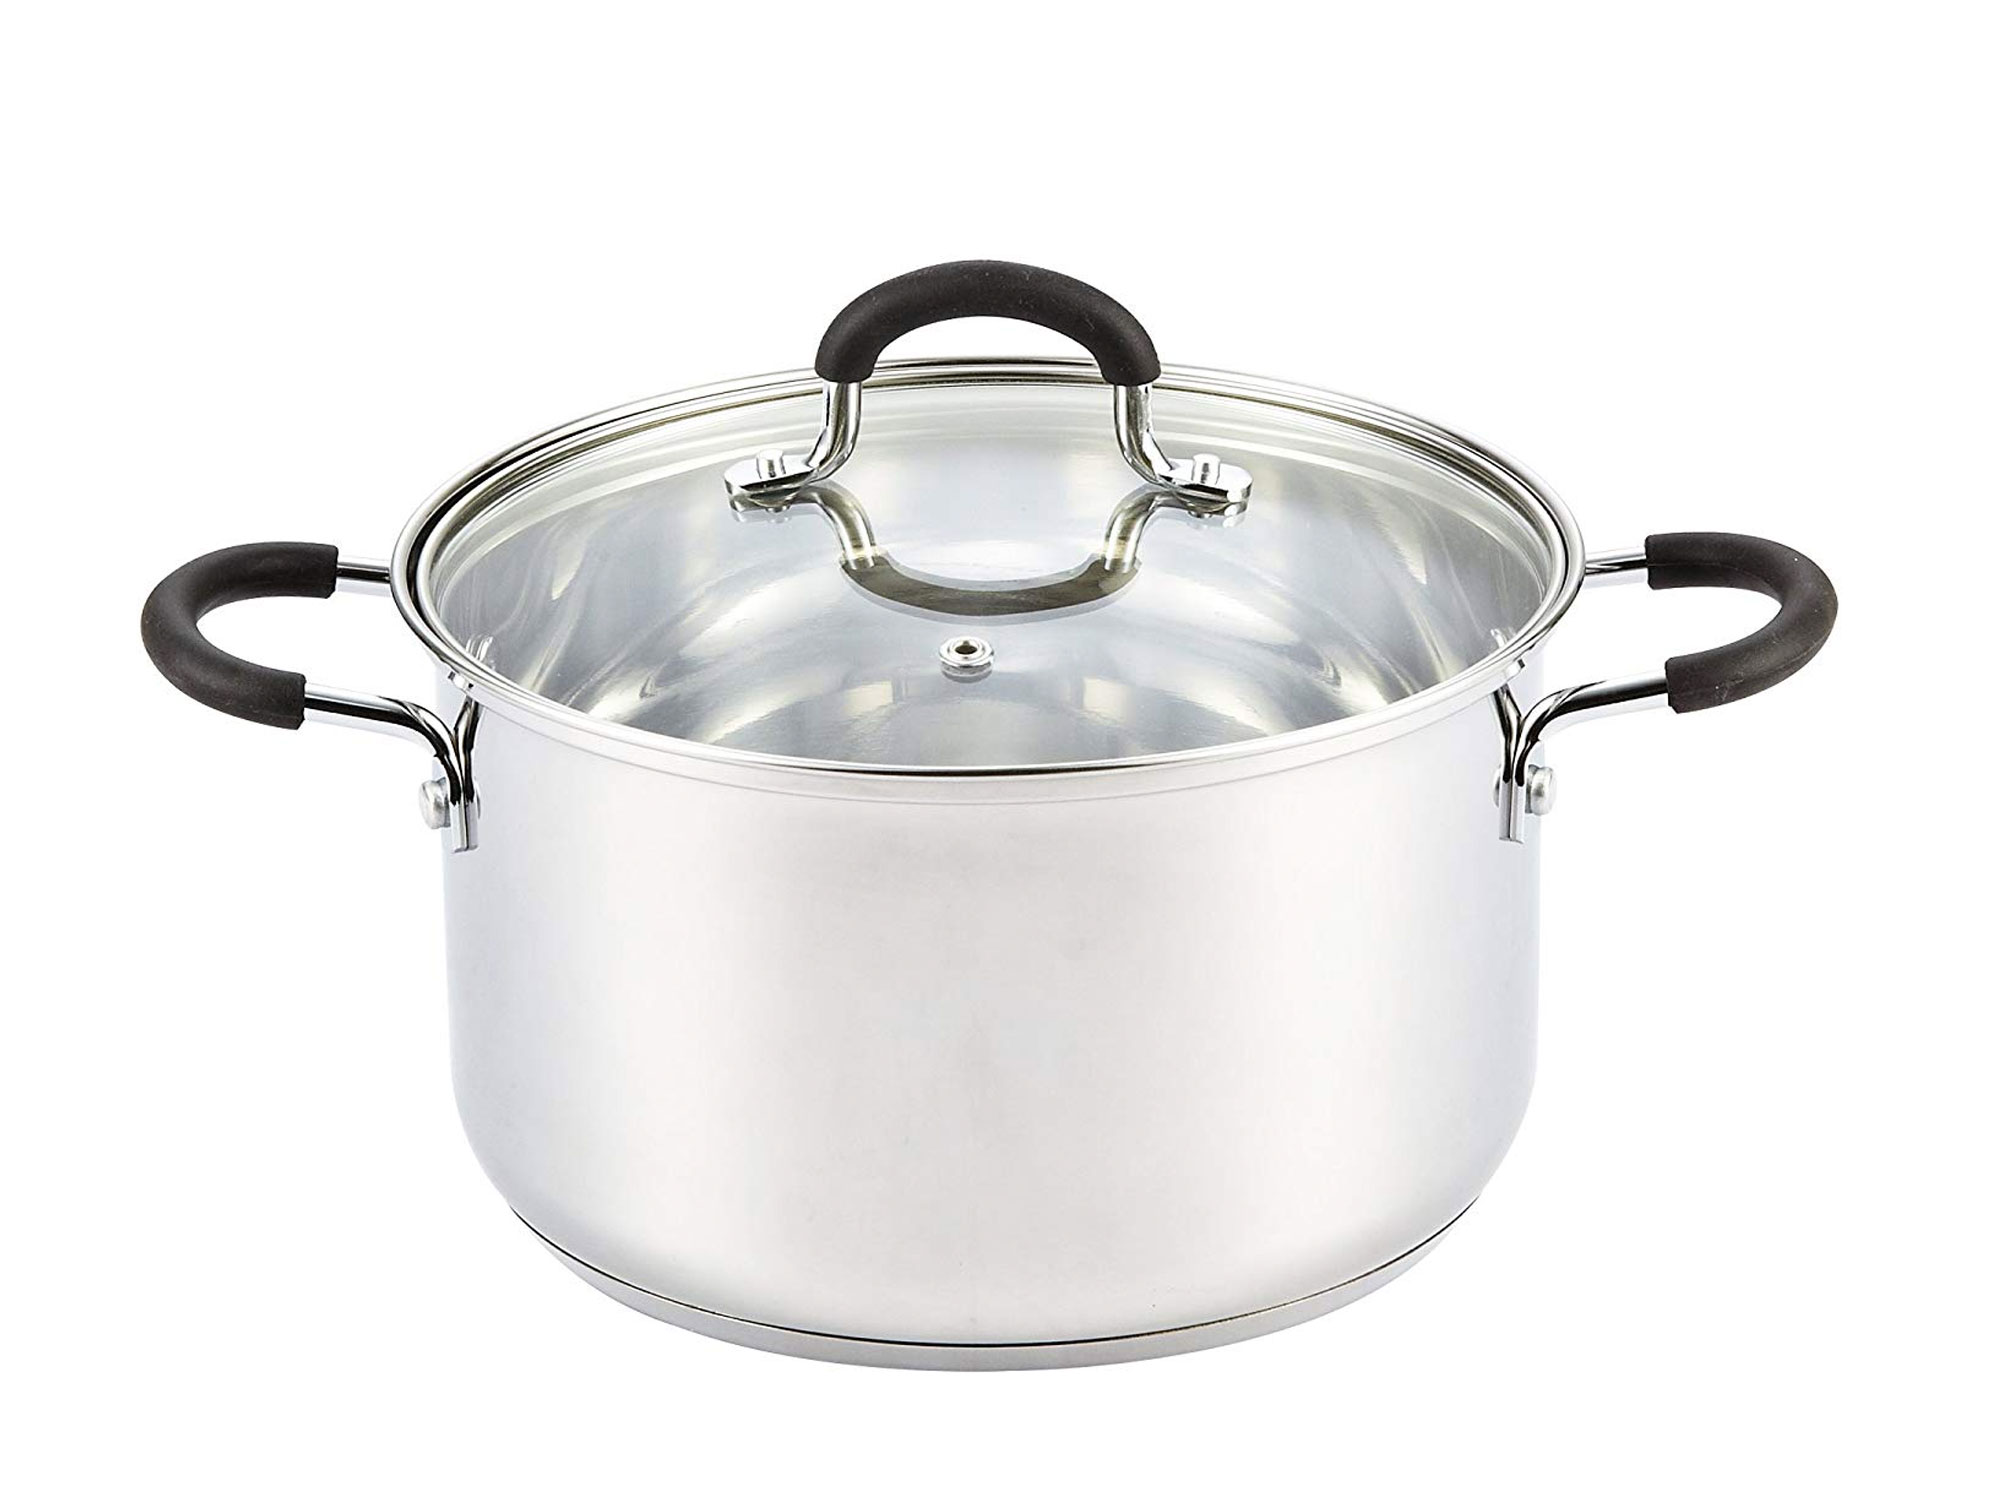 Cook N Home Stockpot with Lid, Basic Stainless Steel Soup Pot & Reviews